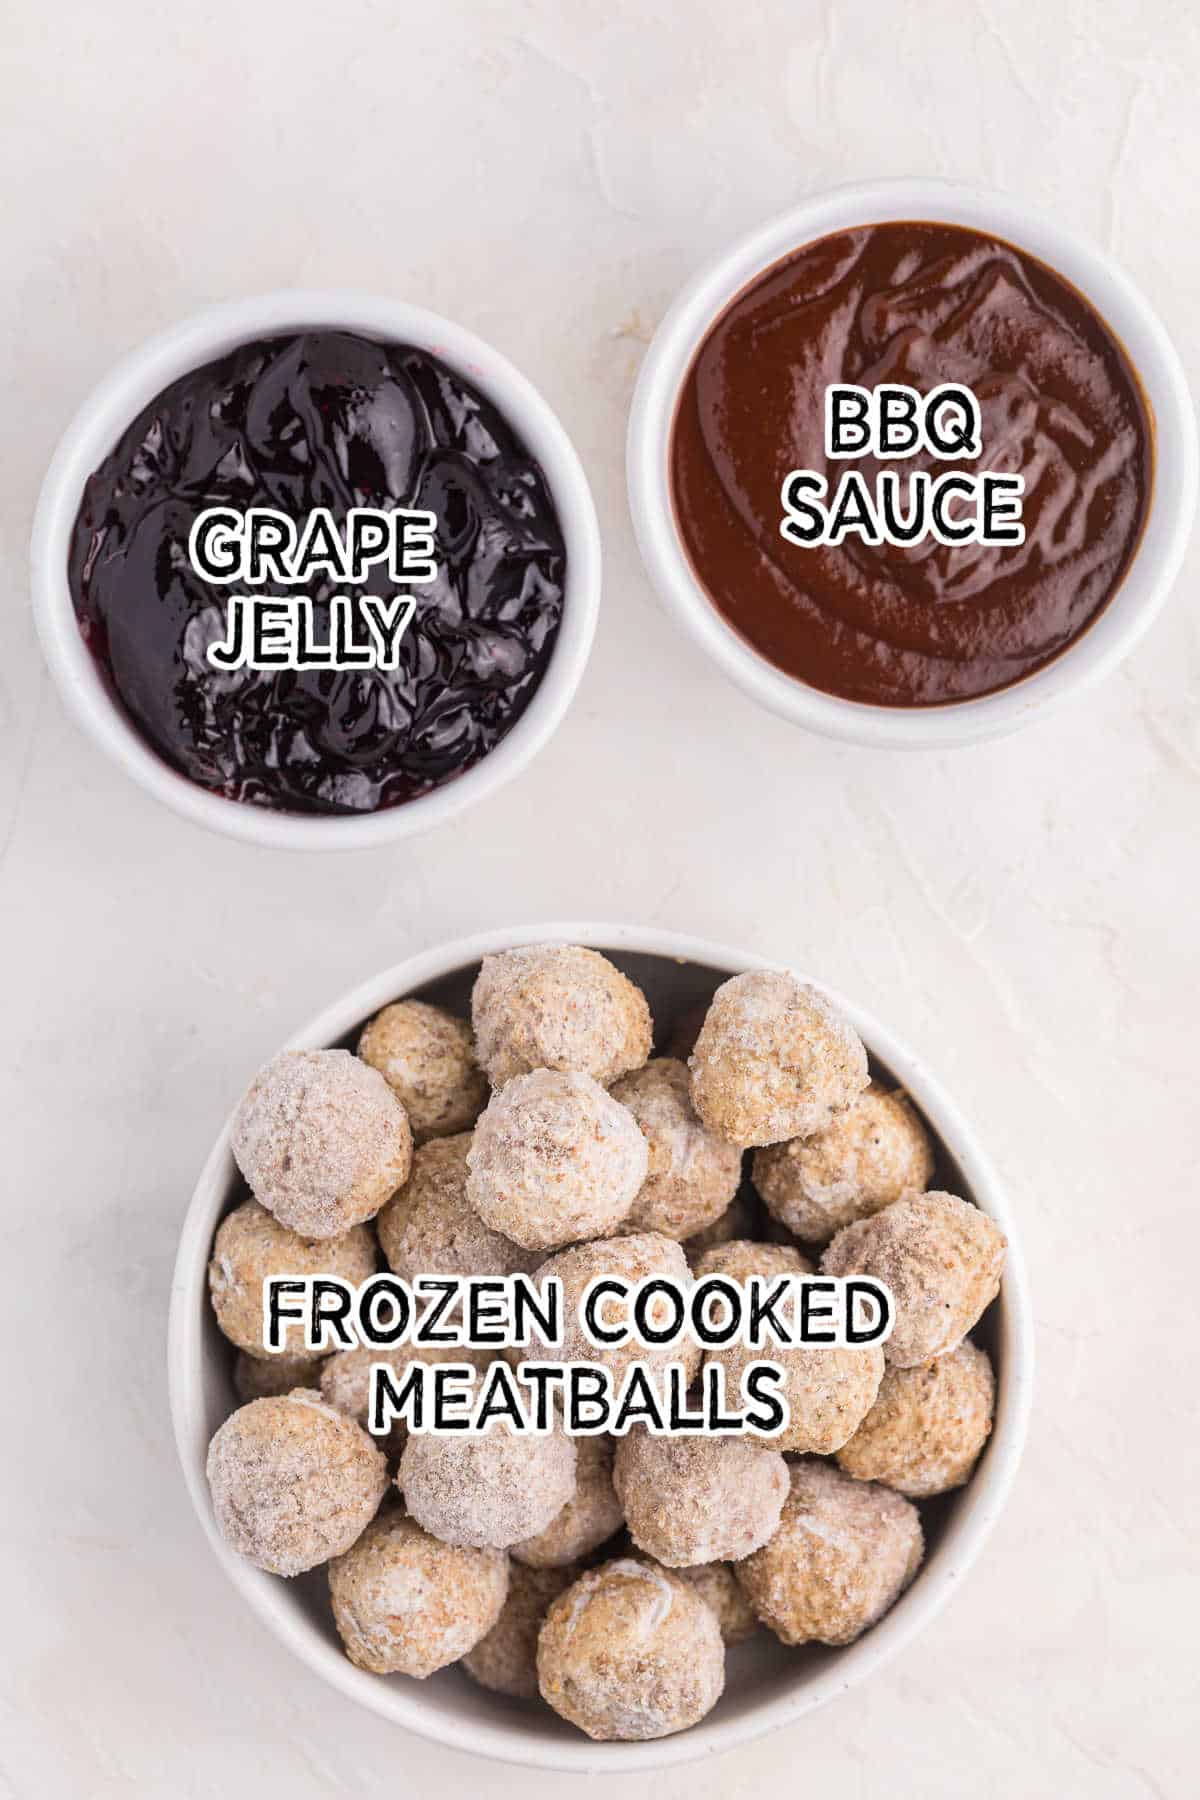 Ingredients to make grape jelly meatballs.